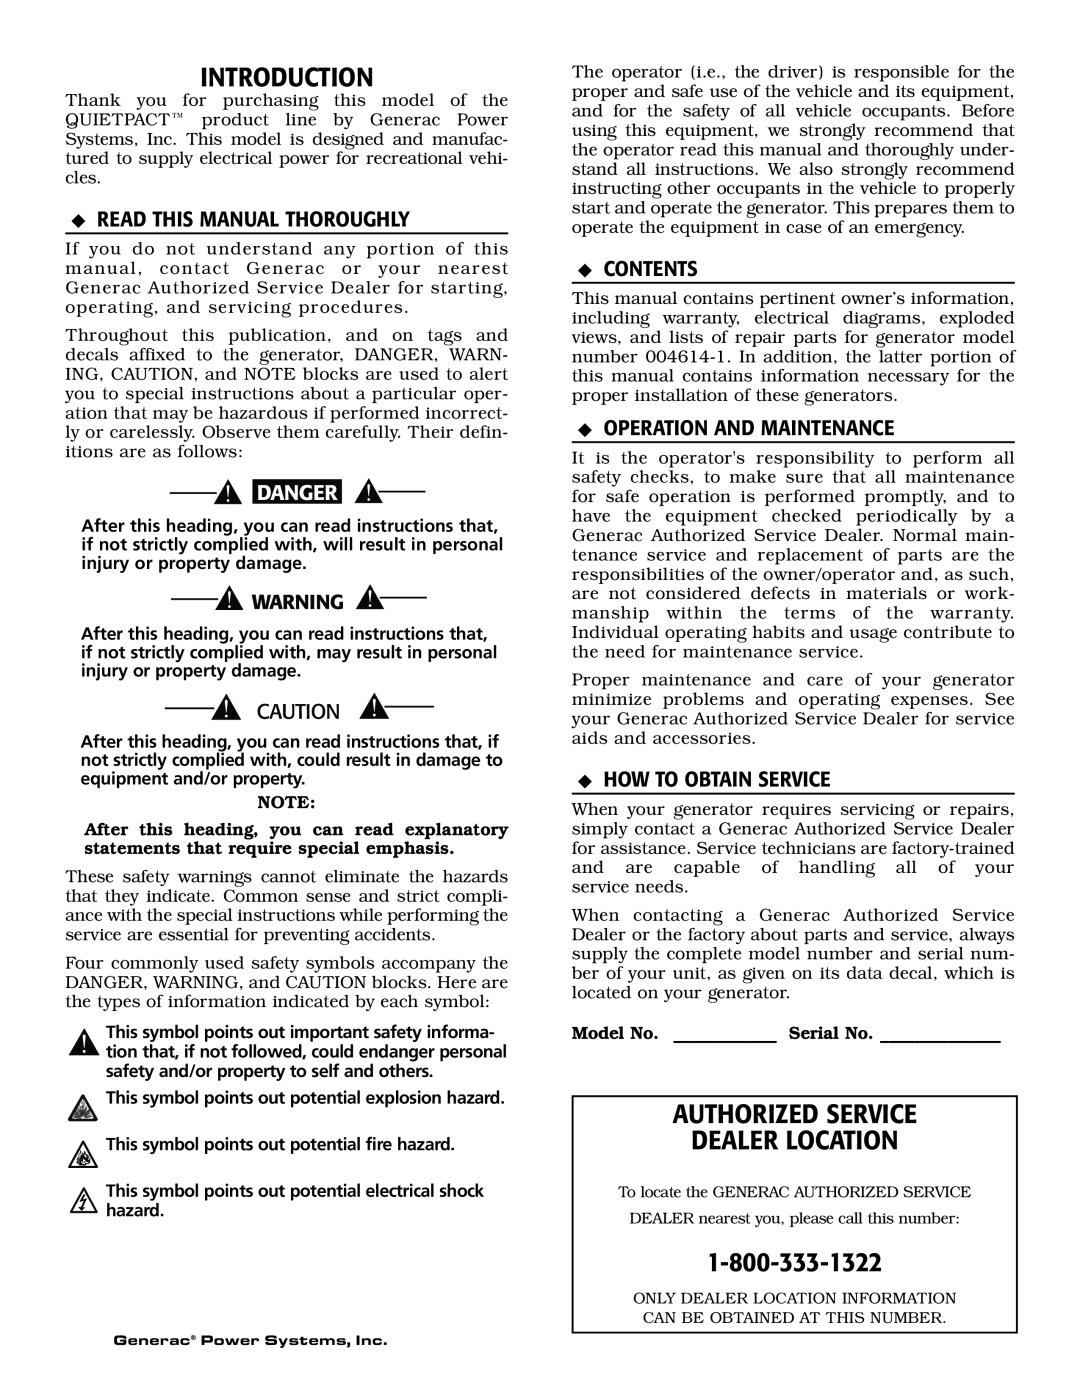 Generac 004614-1 owner manual Introduction, Authorized Service Dealer Location, Read This Manual Thoroughly, Contents 